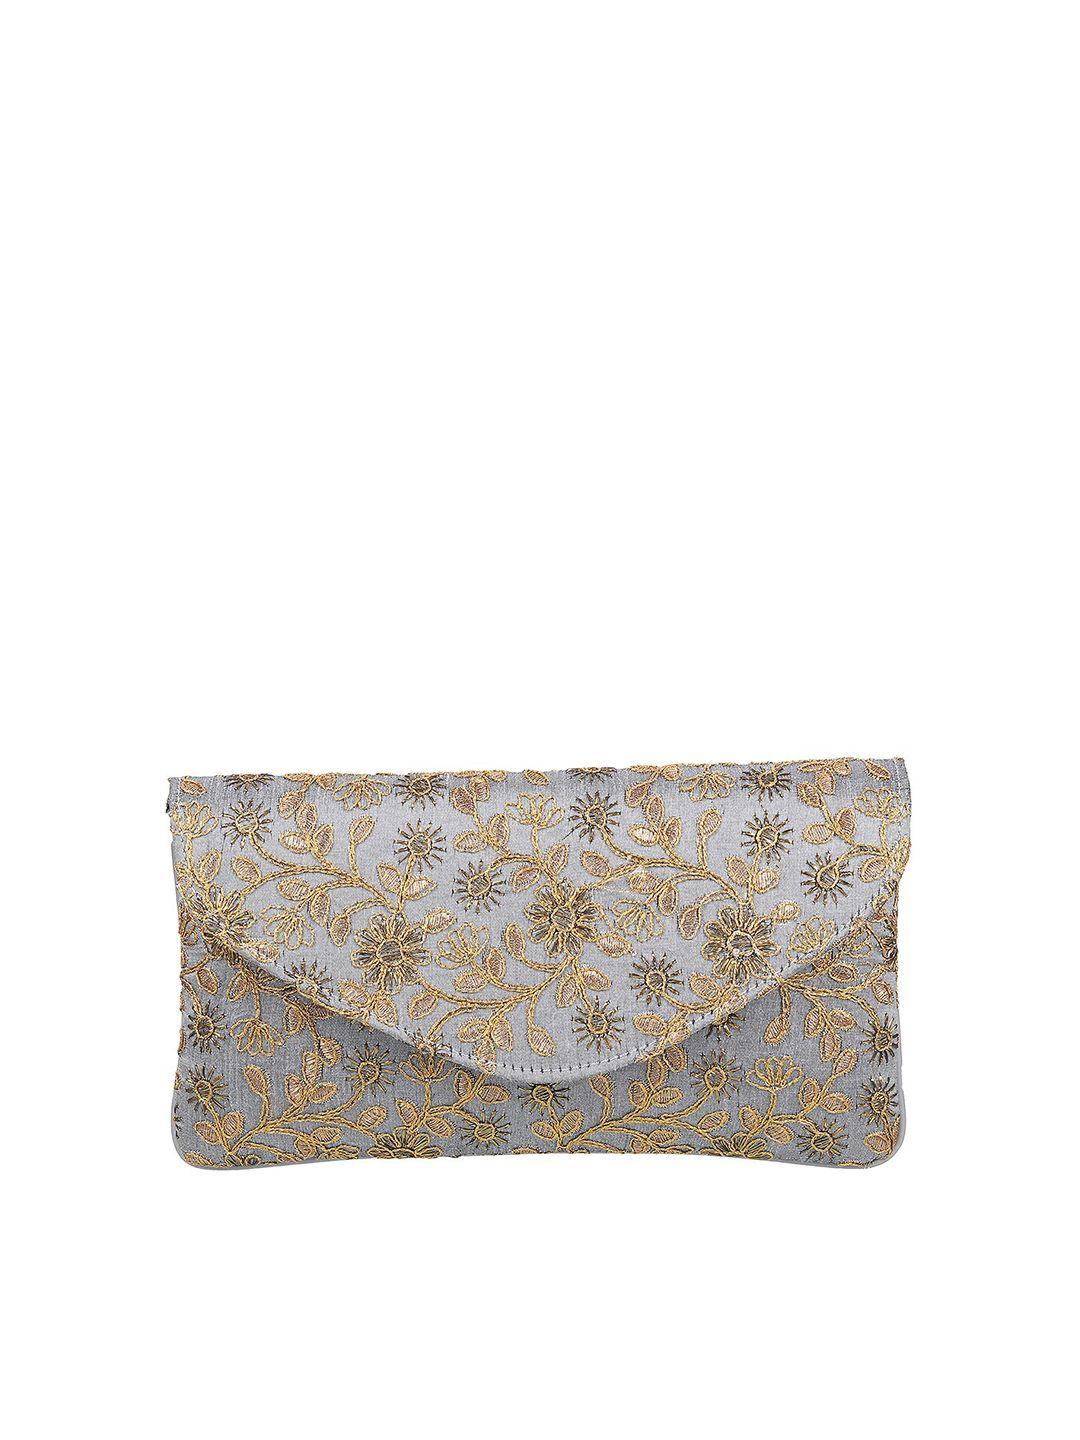 metro grey & gold-toned embroidered envelope clutch